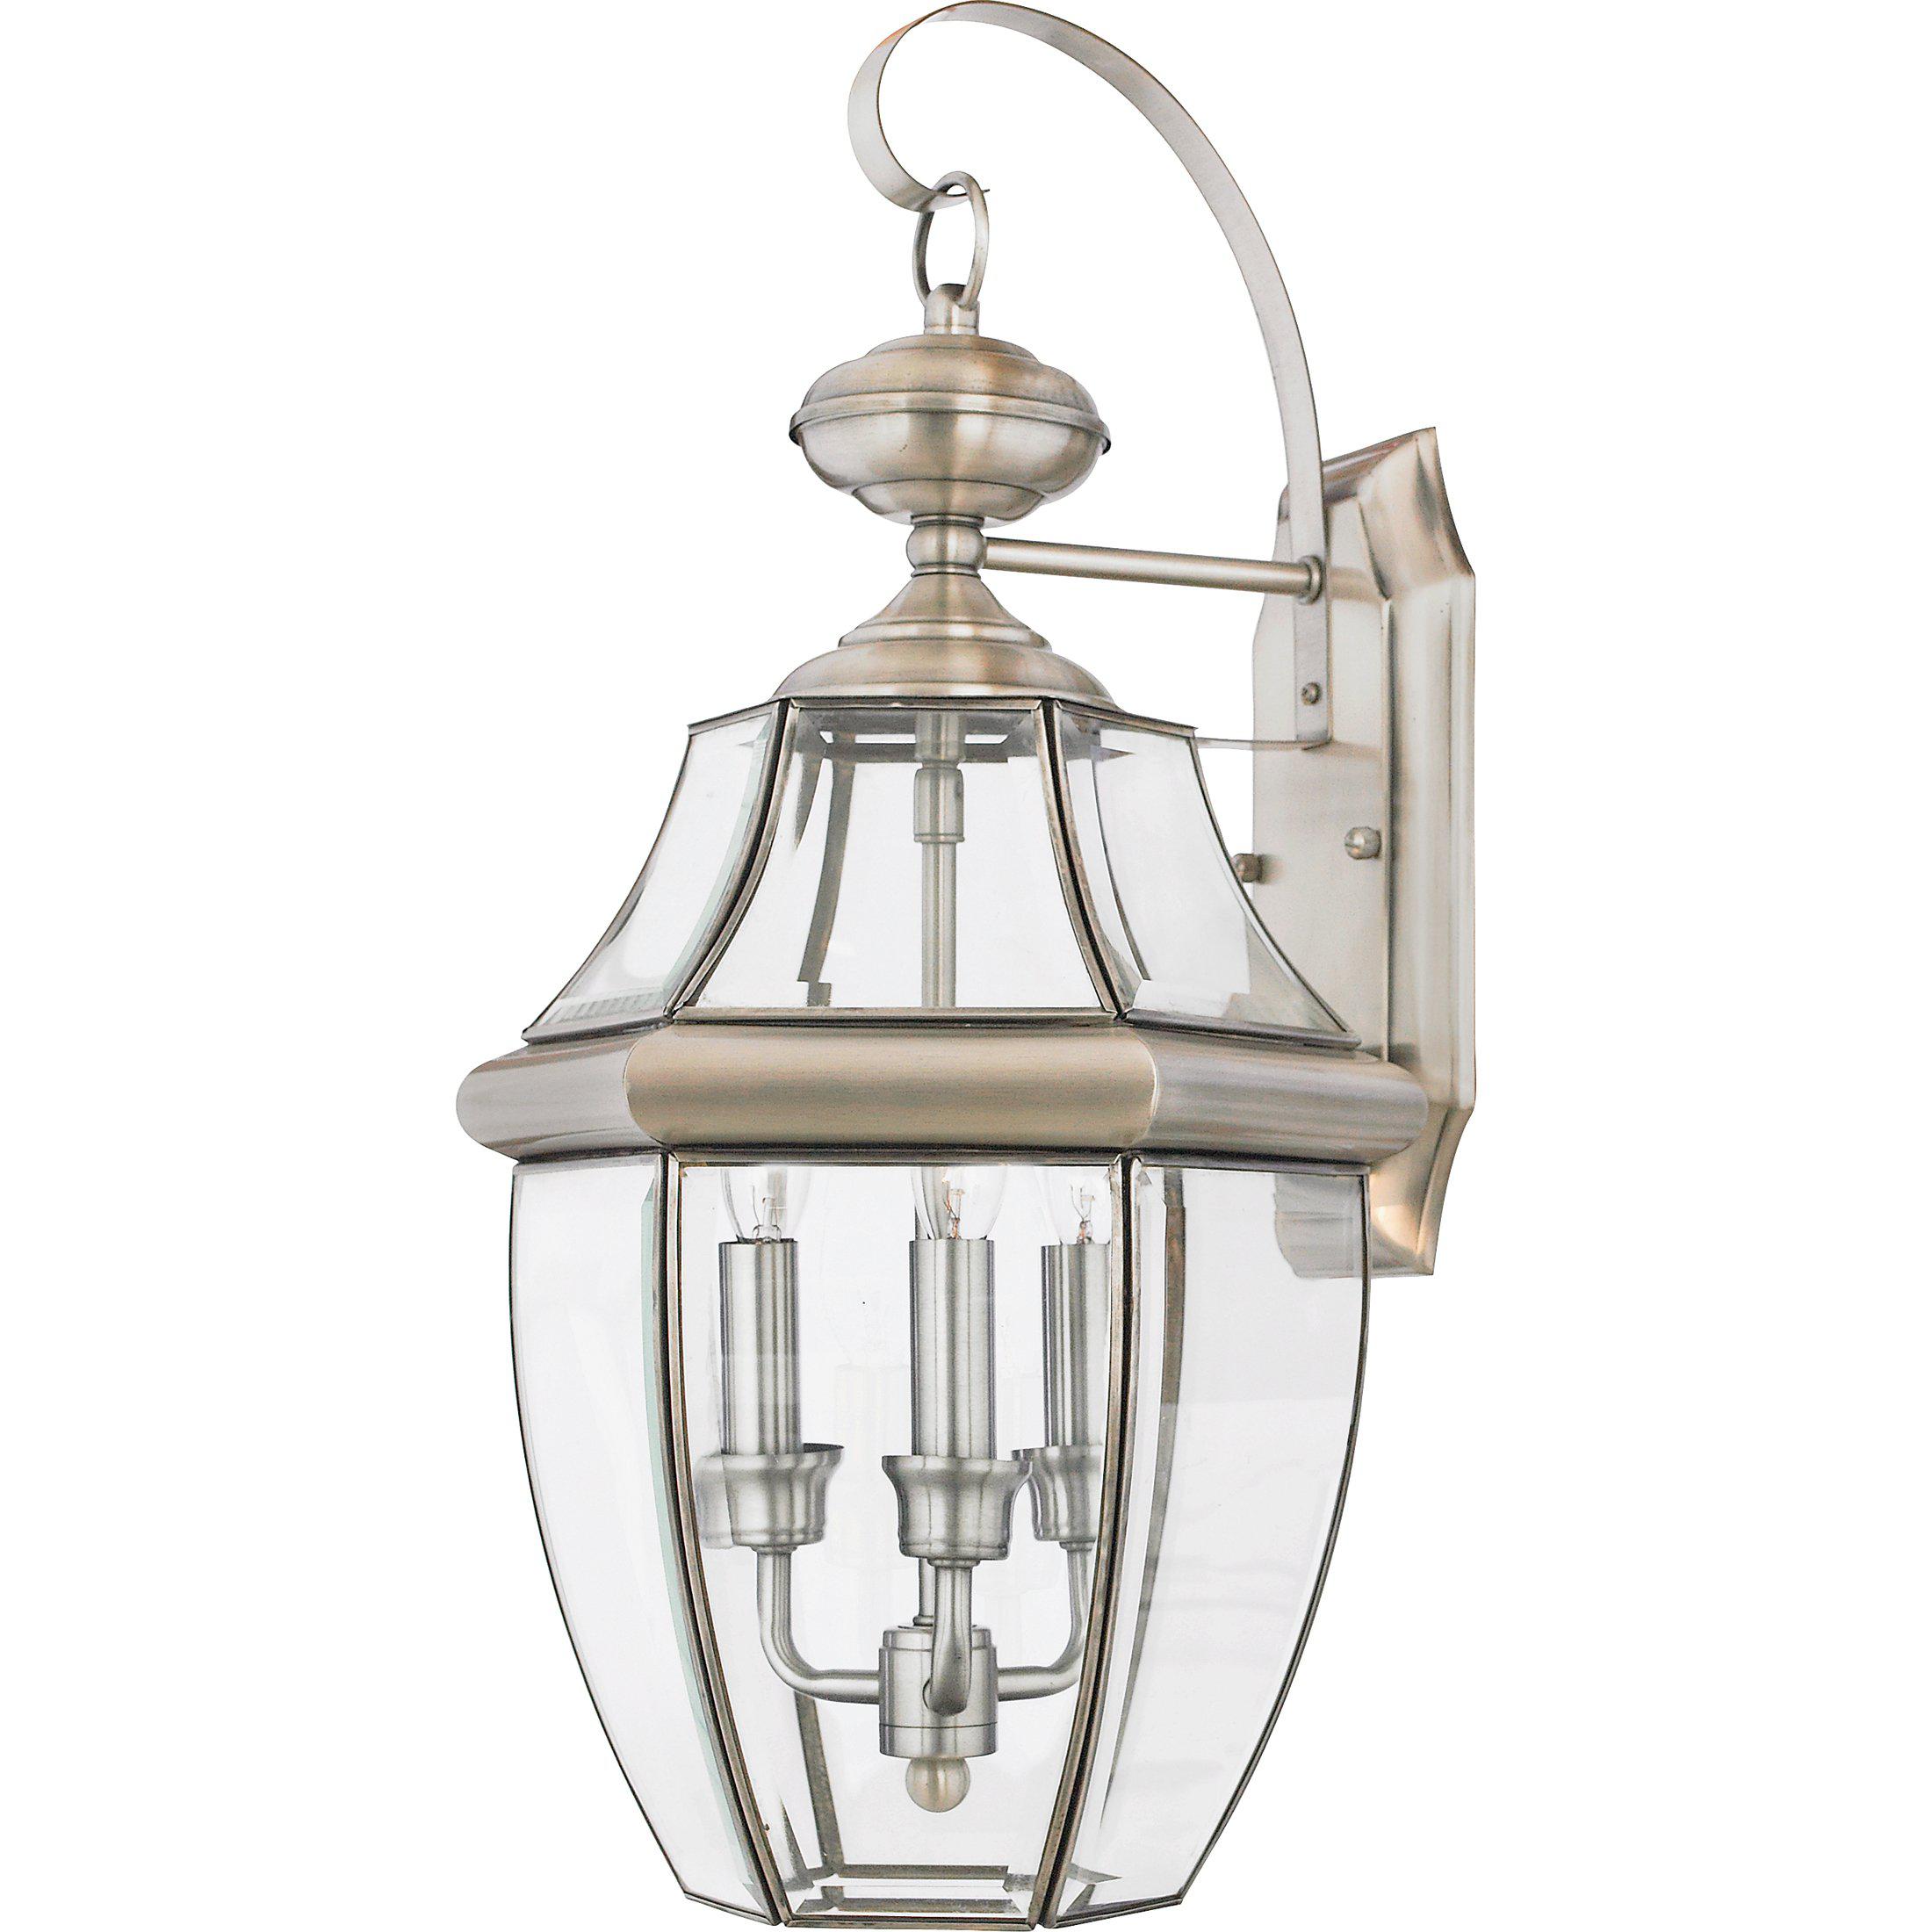 Quoizel  Newbury Outdoor Lantern, XL Outdoor l Wall Quoizel Pewter  